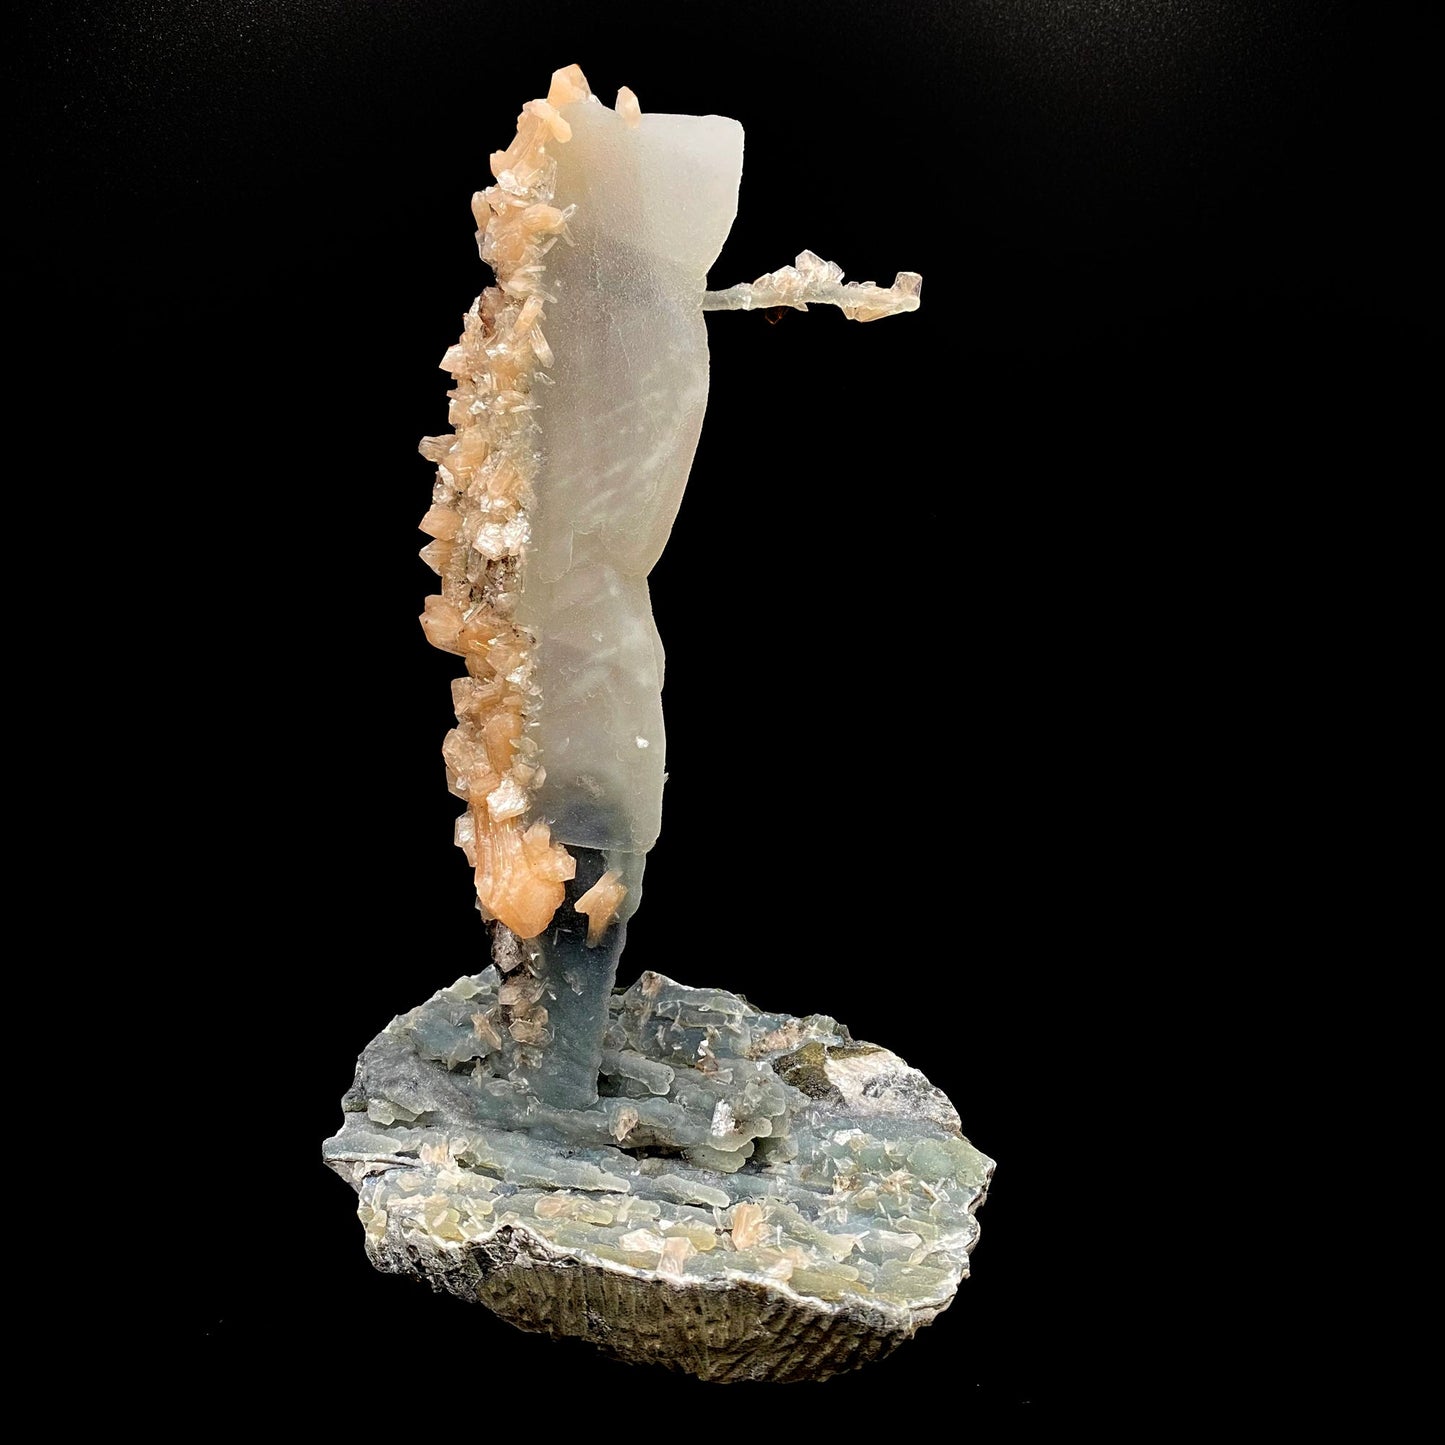 Towering calcite specimen coated in chalcedony and stilbite with a single distinctive, delicate stalactite growing sideways near the top termination, with stilbite blades of its own. The base is blue chalcedony stalactites with basalt on the bottom.